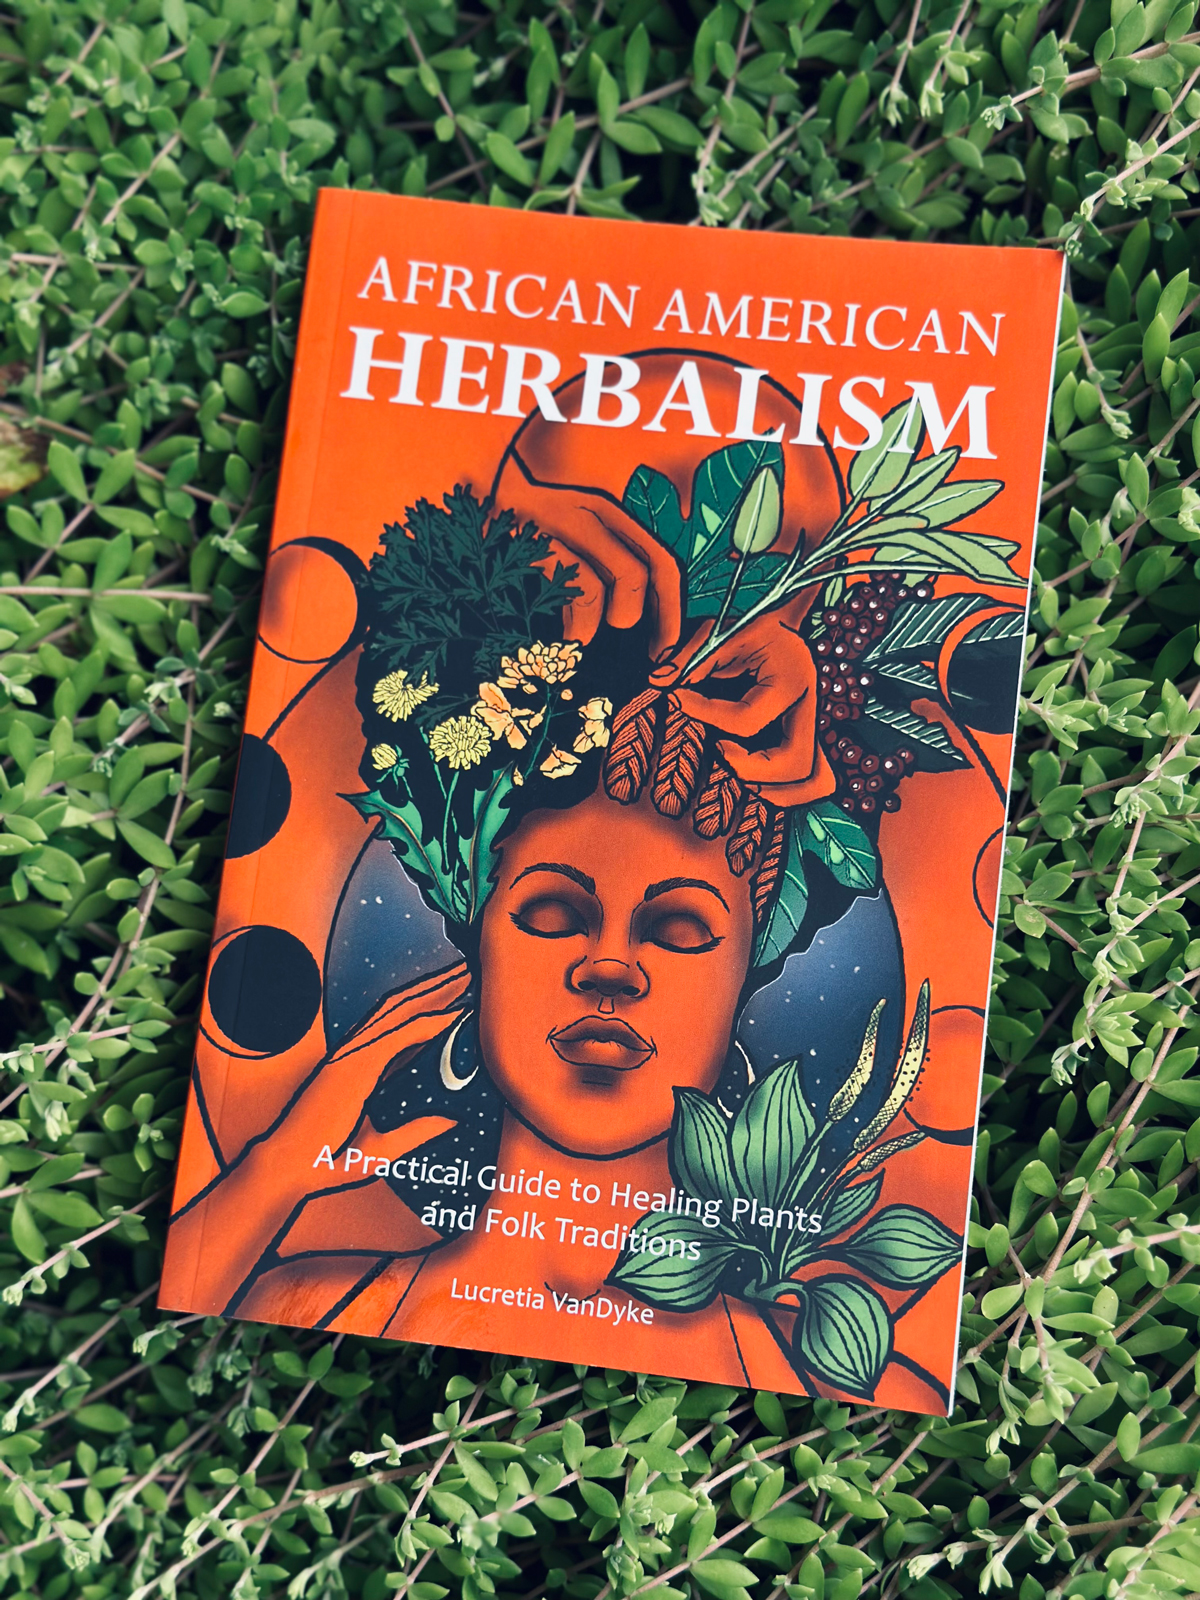 African American Herbalism: A Practical Guide to Healing Plants and Folk Traditions by Lucretia VanDyke is an excellent addition to any home herbal apothecary library.